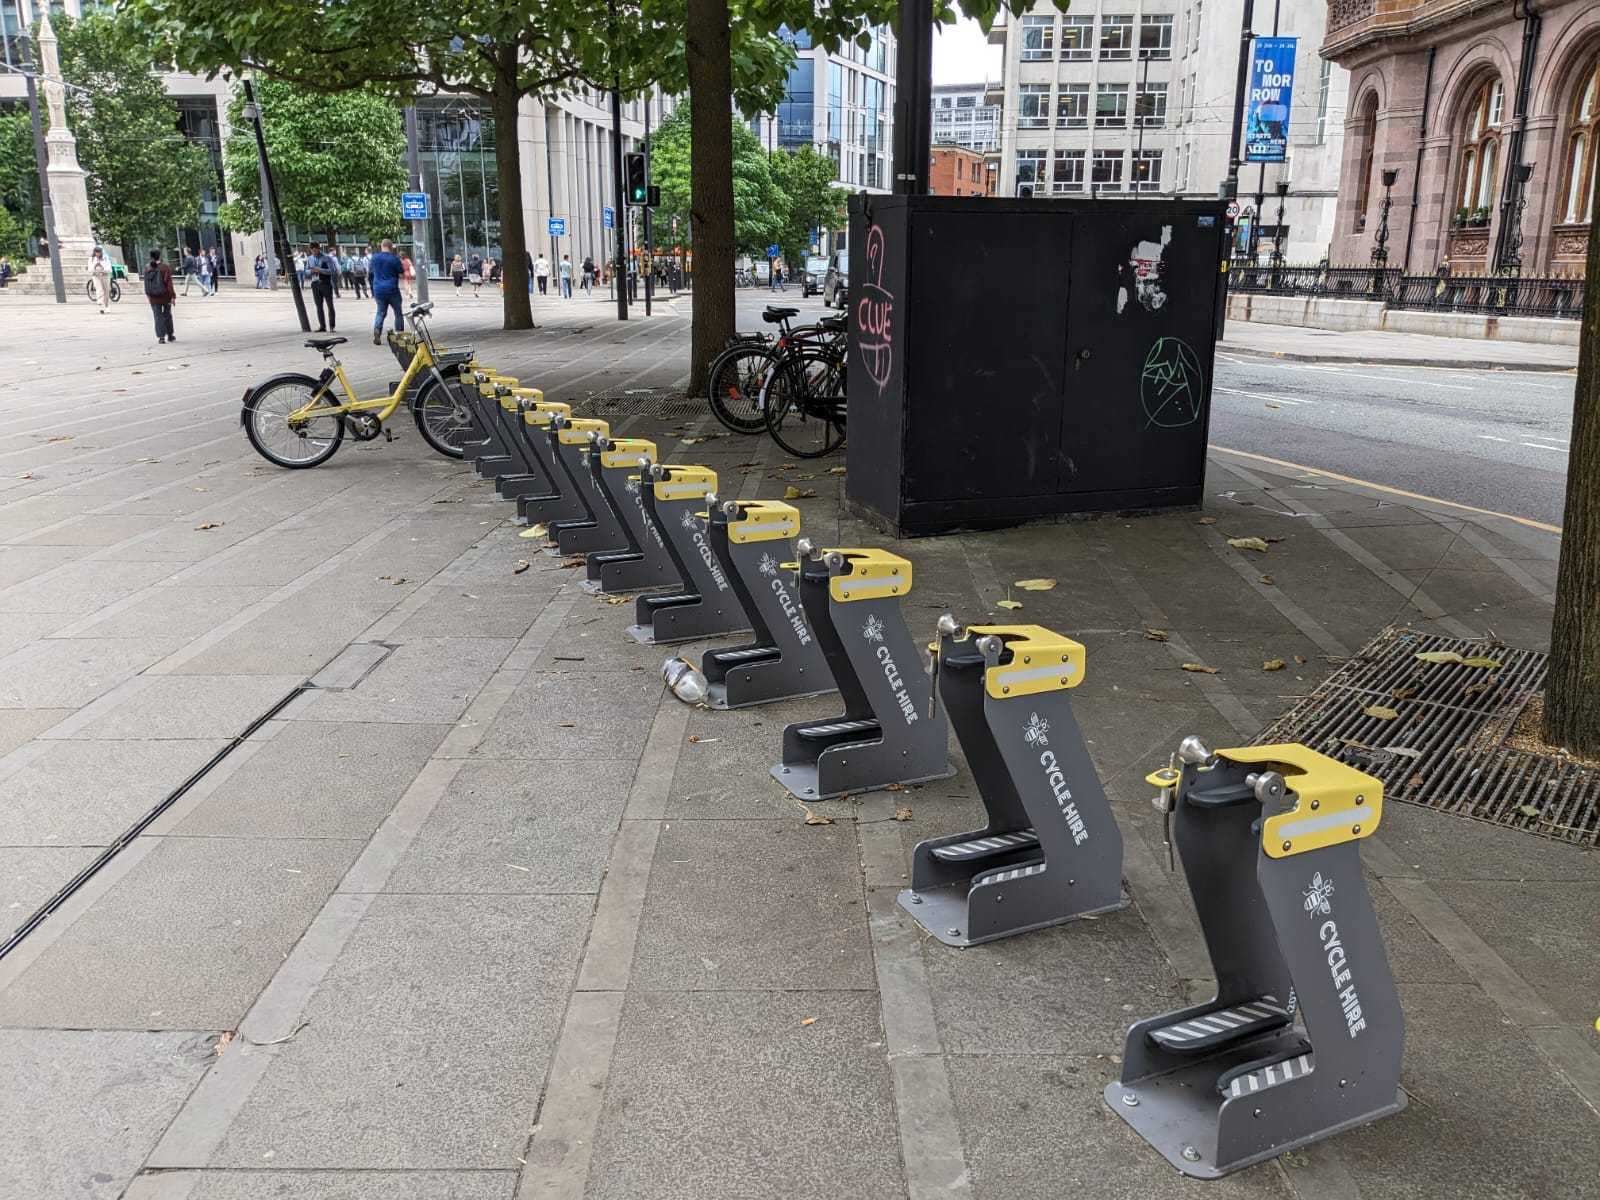 A Bee Bike stand by Central Library in Manchester in June (Picture: LDRS)